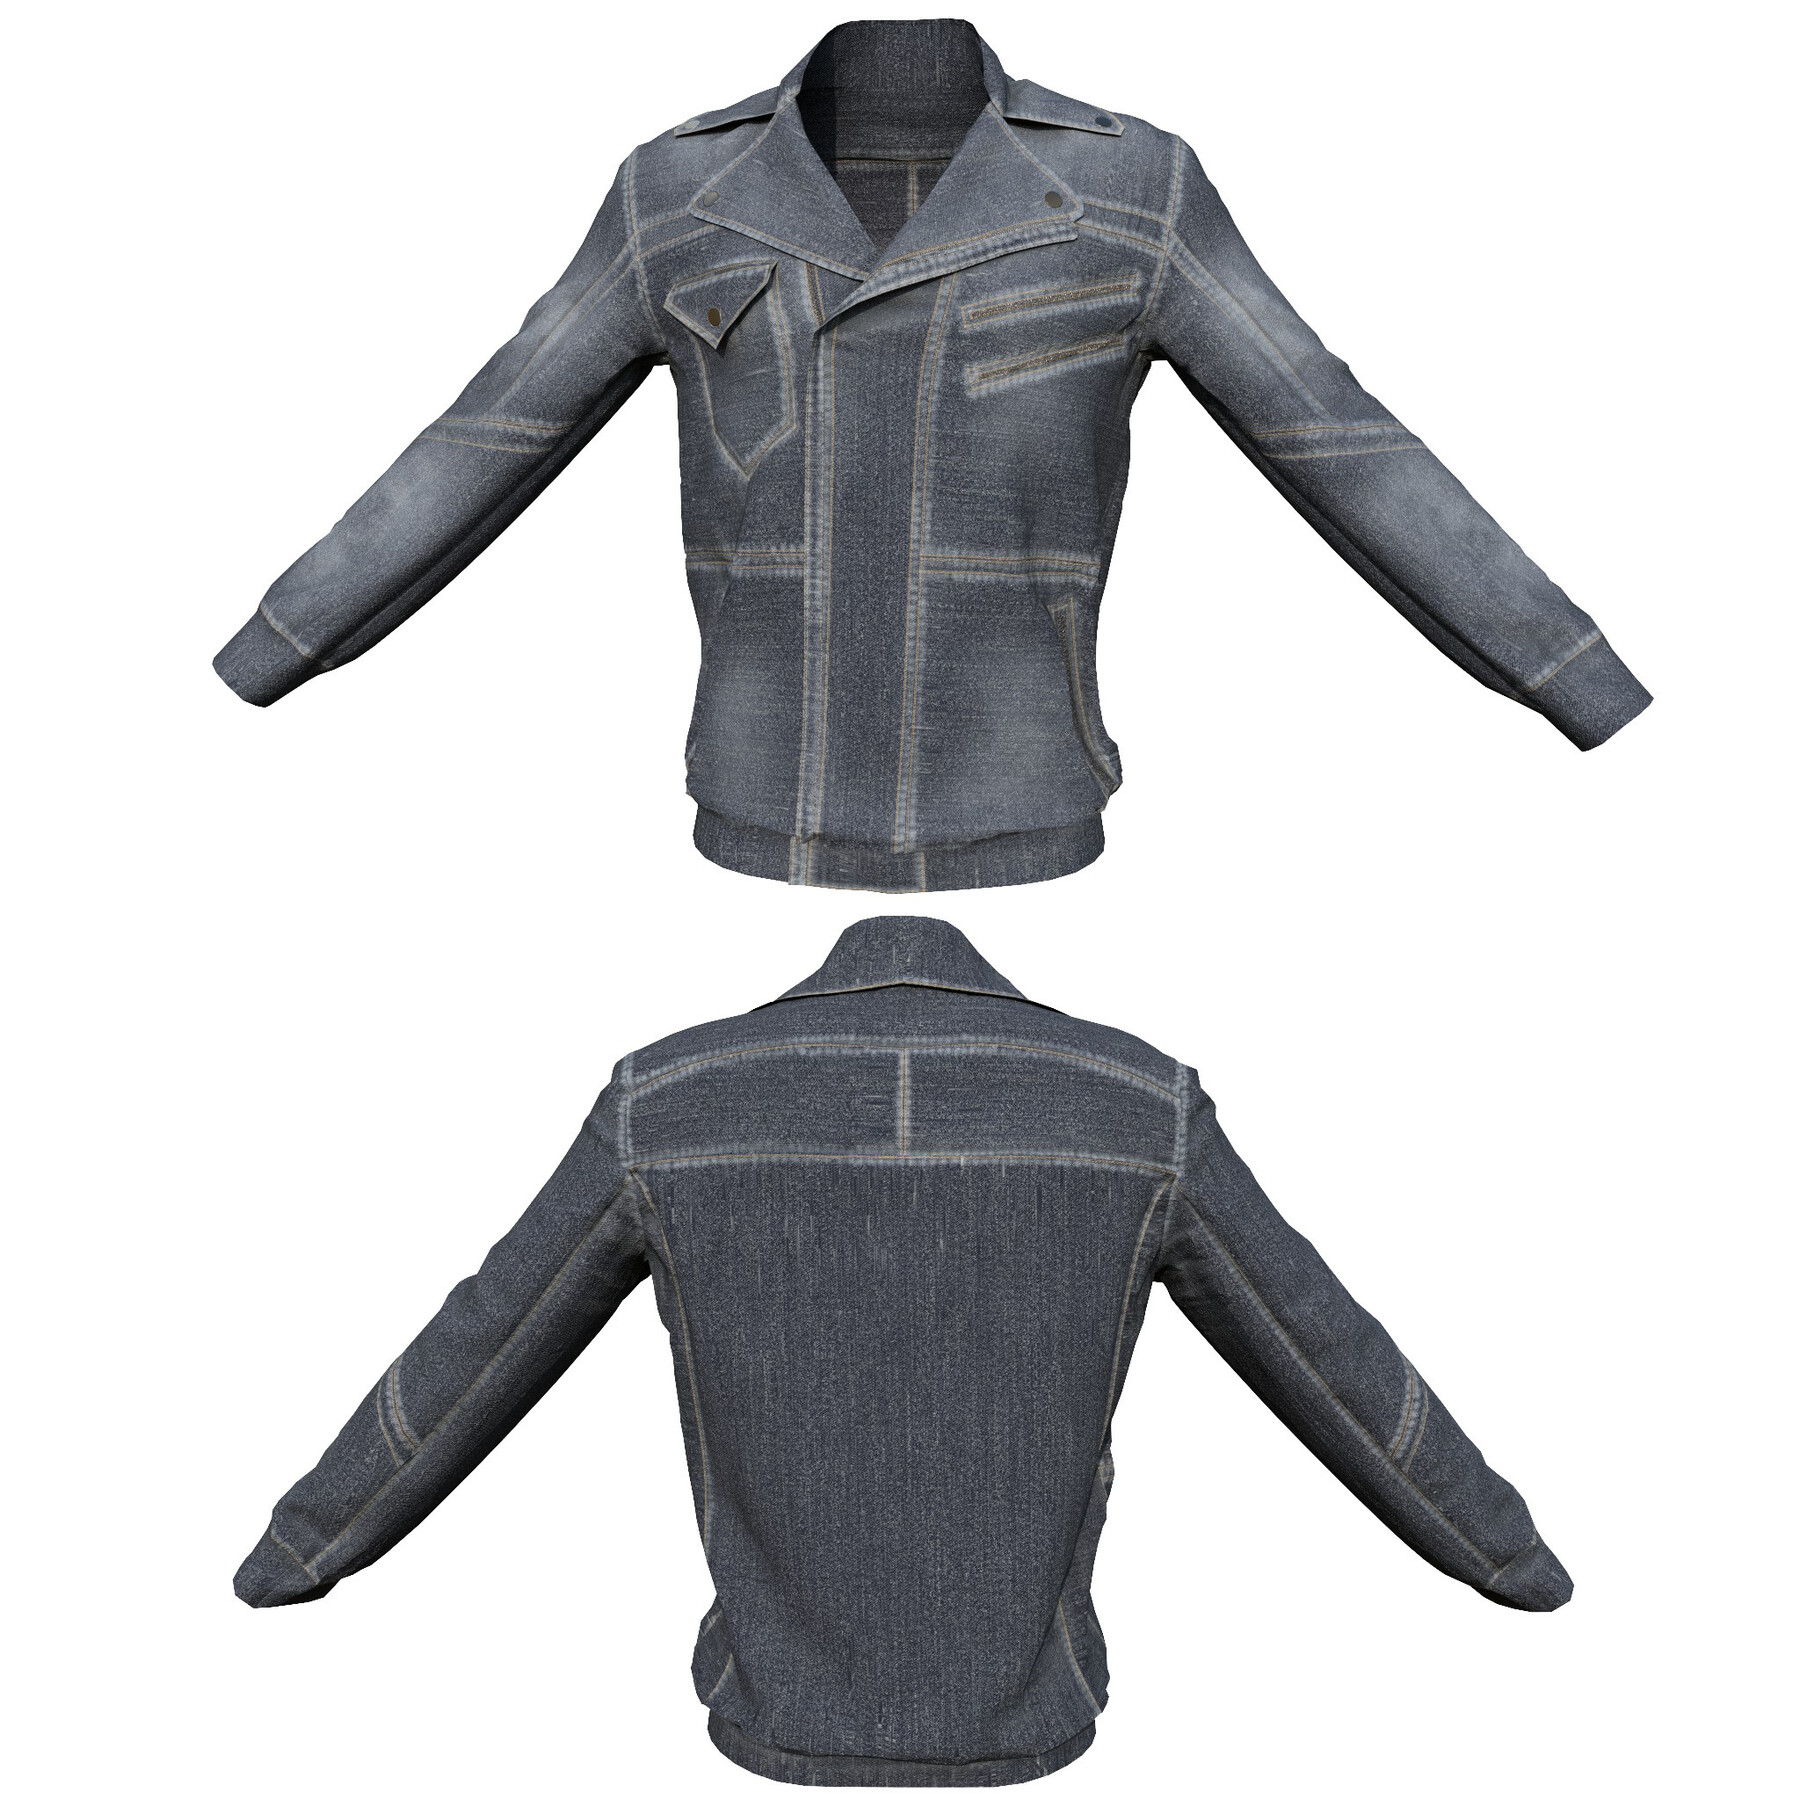 ArtStation - Low poly Male Jacket Collection 201204 | Game Assets